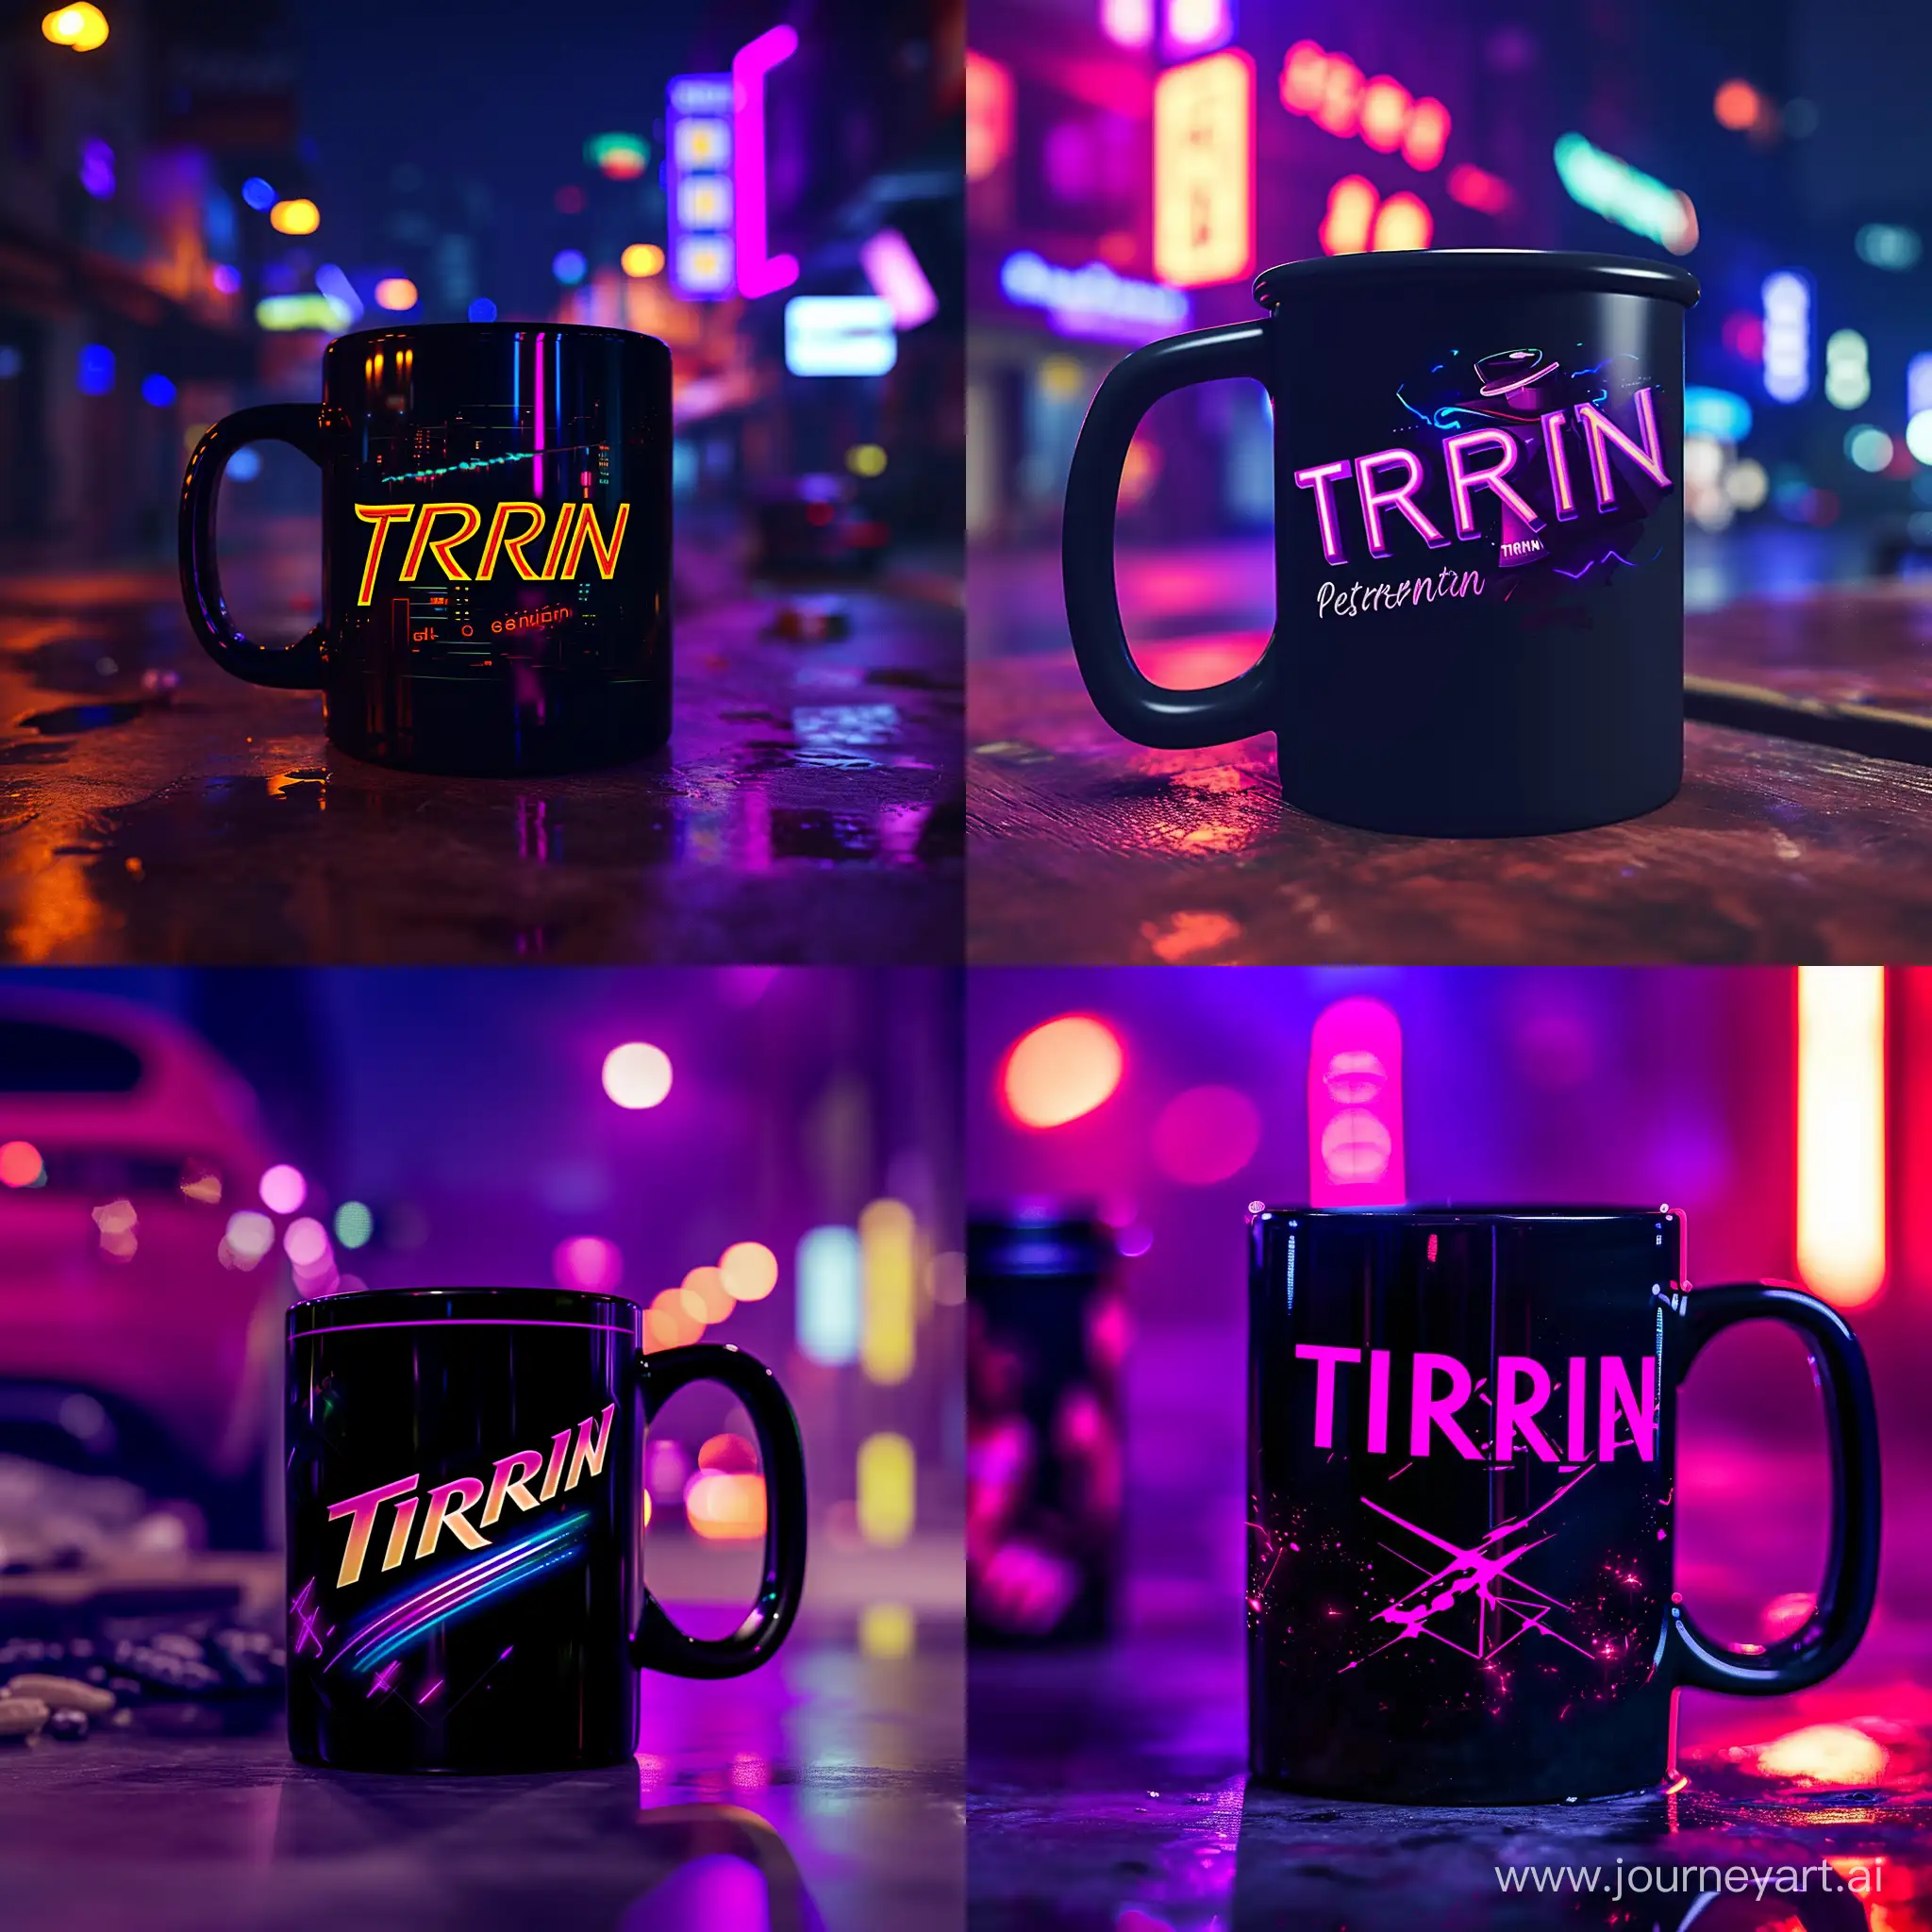 TIRRIN-Logo-Coffee-Mug-in-High-Detail-with-Vibrant-Colors-and-Neon-Lights